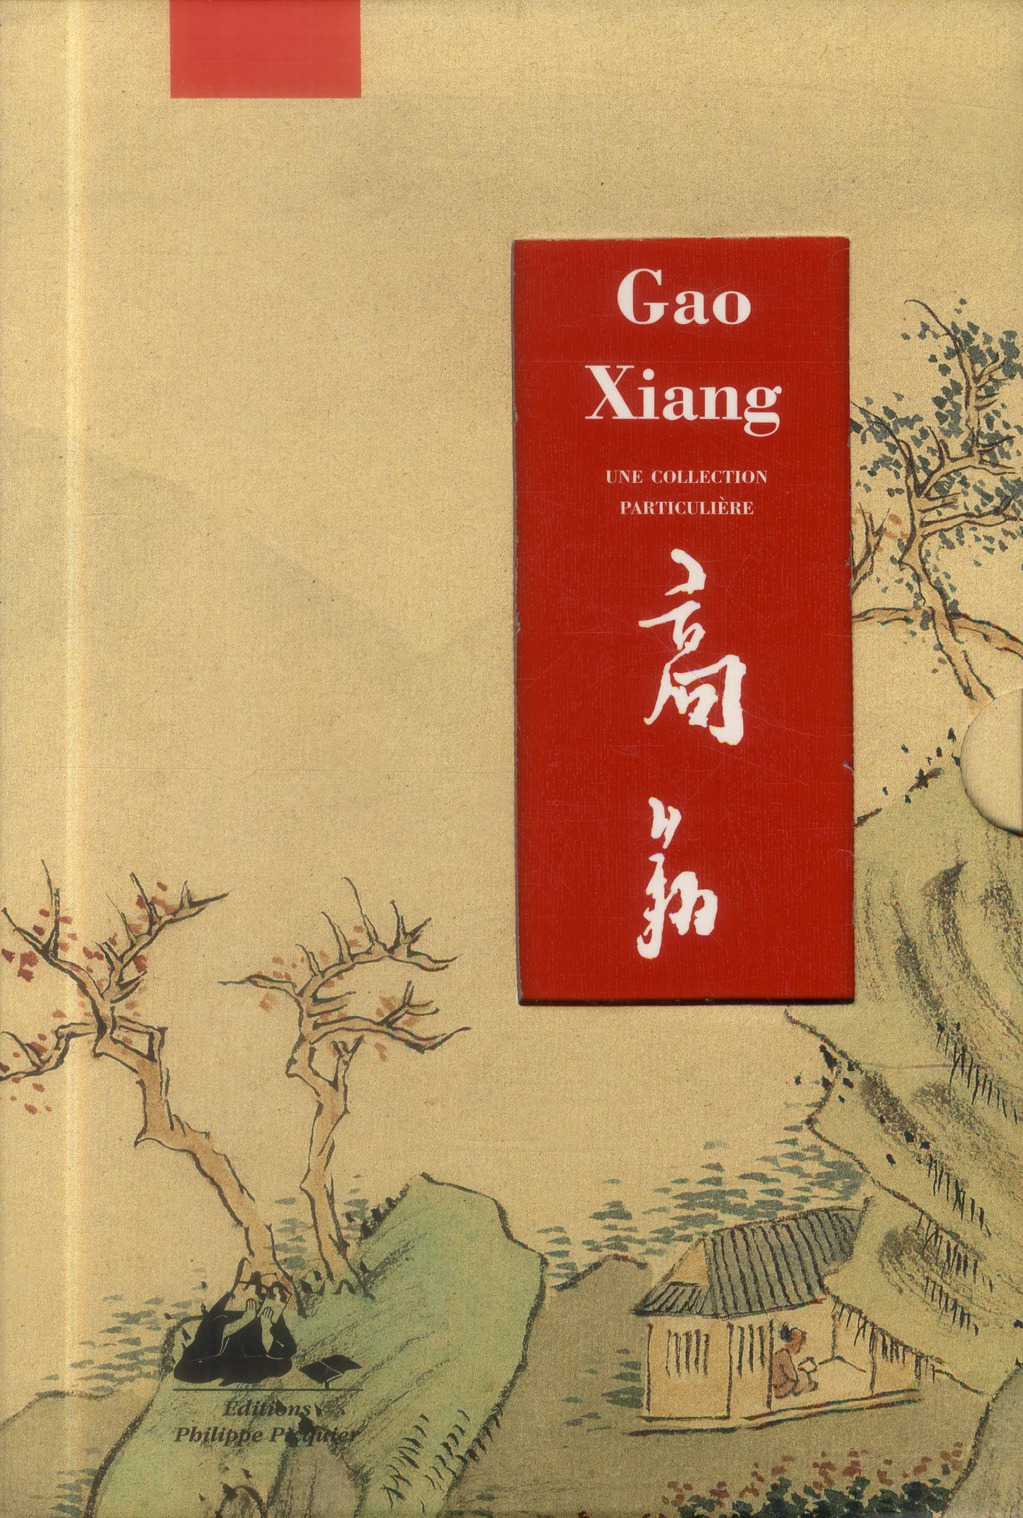 GAO XIANG - HUANG DING - UNE COLLECTION PARTICULIERE